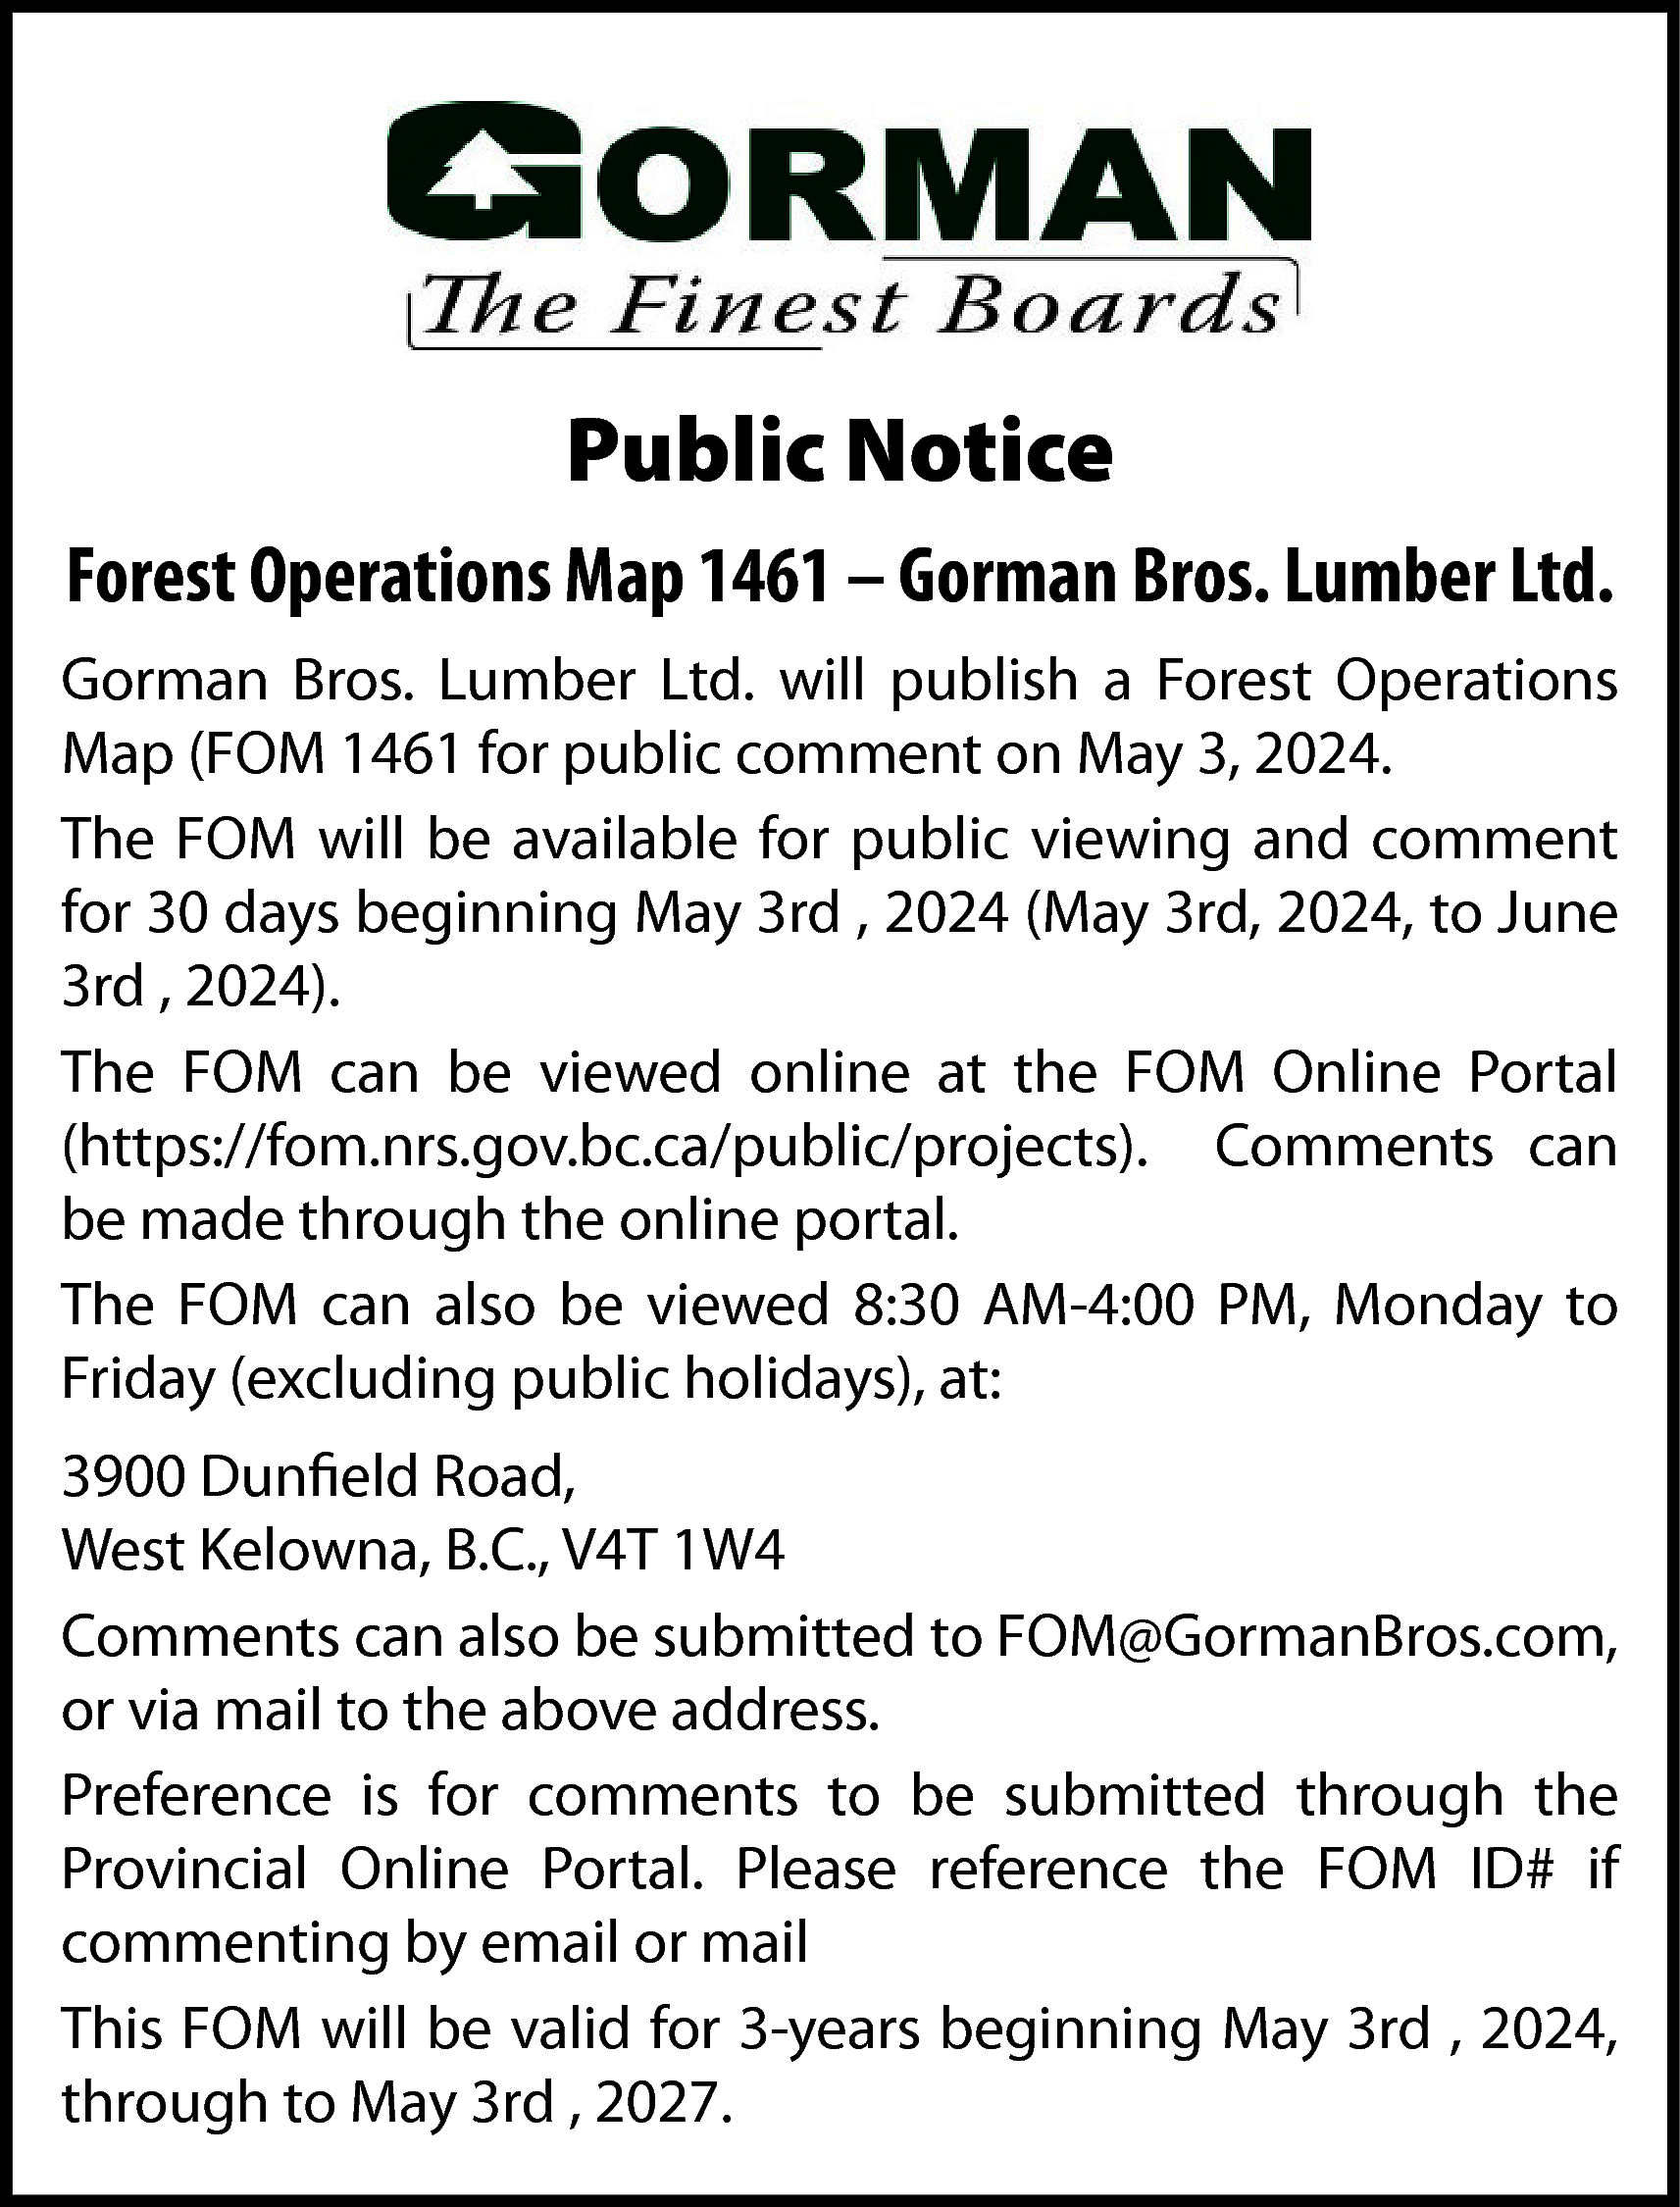 Public Notice <br>Forest Operations Map  Public Notice  Forest Operations Map 1461 – Gorman Bros. Lumber Ltd.  Gorman Bros. Lumber Ltd. will publish a Forest Operations  Map (FOM 1461 for public comment on May 3, 2024.  The FOM will be available for public viewing and comment  for 30 days beginning May 3rd , 2024 (May 3rd, 2024, to June  3rd , 2024).  The FOM can be viewed online at the FOM Online Portal  (https://fom.nrs.gov.bc.ca/public/projects). Comments can  be made through the online portal.  The FOM can also be viewed 8:30 AM-4:00 PM, Monday to  Friday (excluding public holidays), at:  3900 Dunfield Road,  West Kelowna, B.C., V4T 1W4  Comments can also be submitted to FOM@GormanBros.com,  or via mail to the above address.  Preference is for comments to be submitted through the  Provincial Online Portal. Please reference the FOM ID# if  commenting by email or mail  This FOM will be valid for 3-years beginning May 3rd , 2024,  through to May 3rd , 2027.    